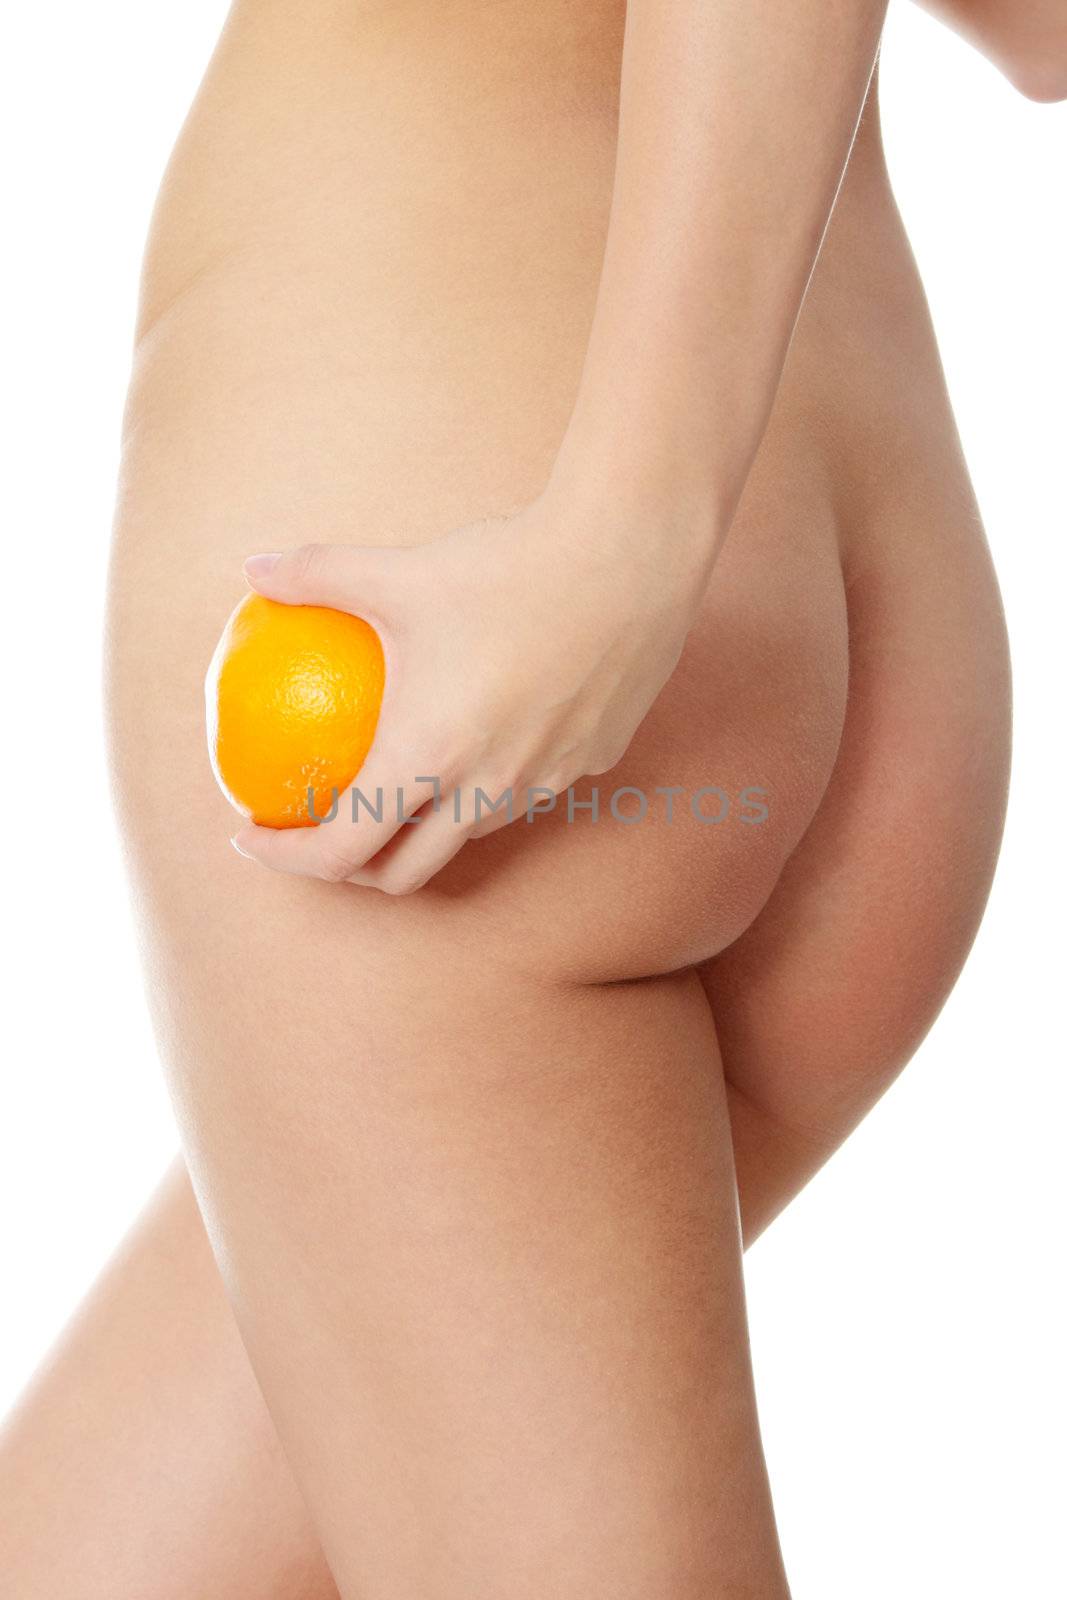 Naked woman's buttocks with orange. Cellulite concept